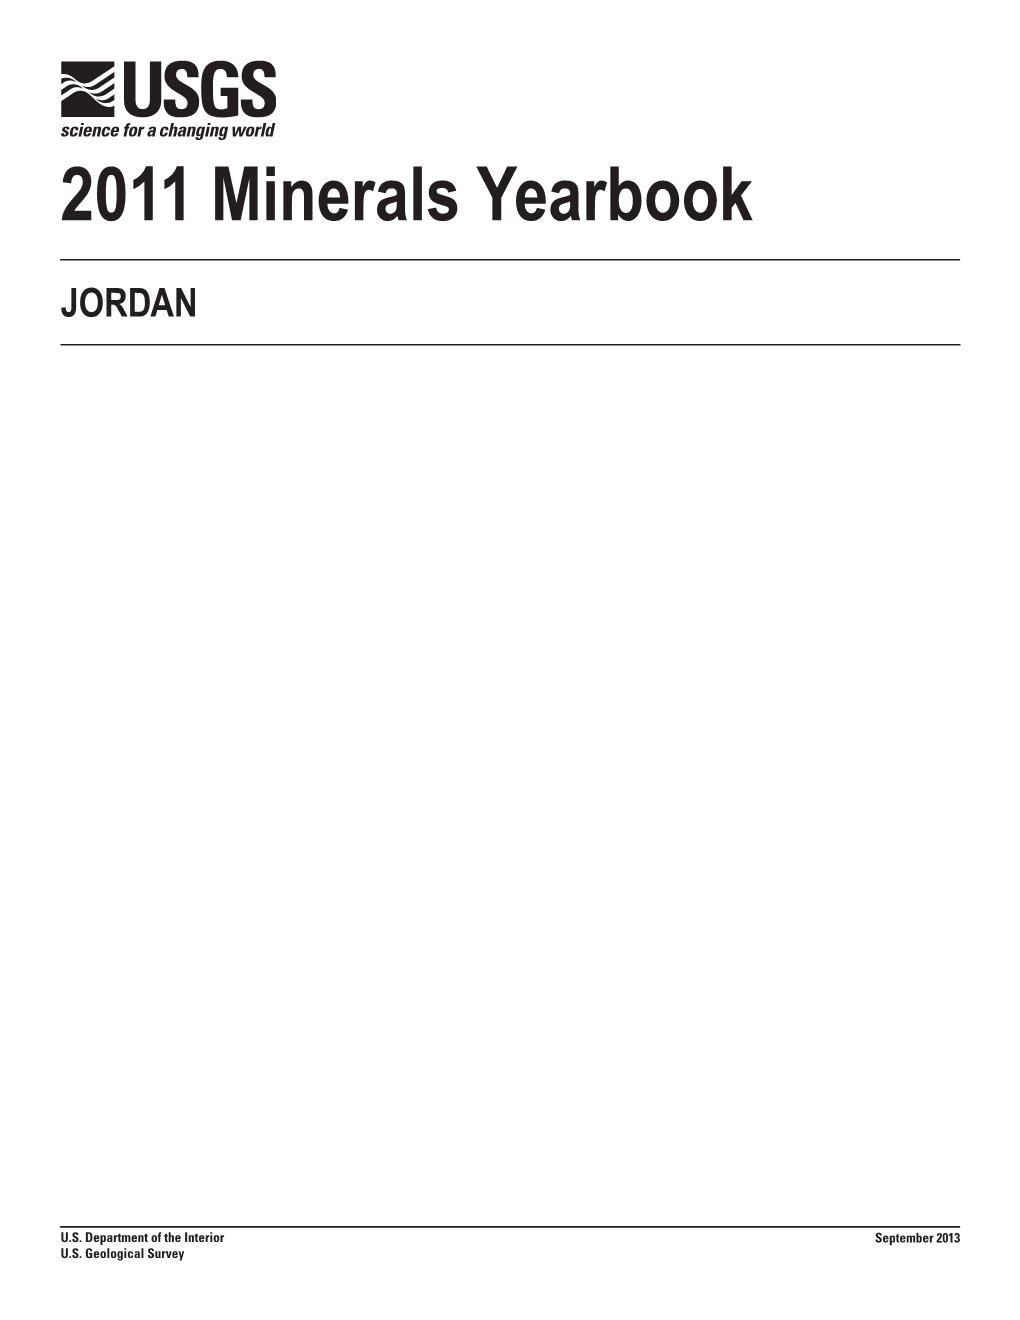 The Mineral Industry of Jordan in 2011